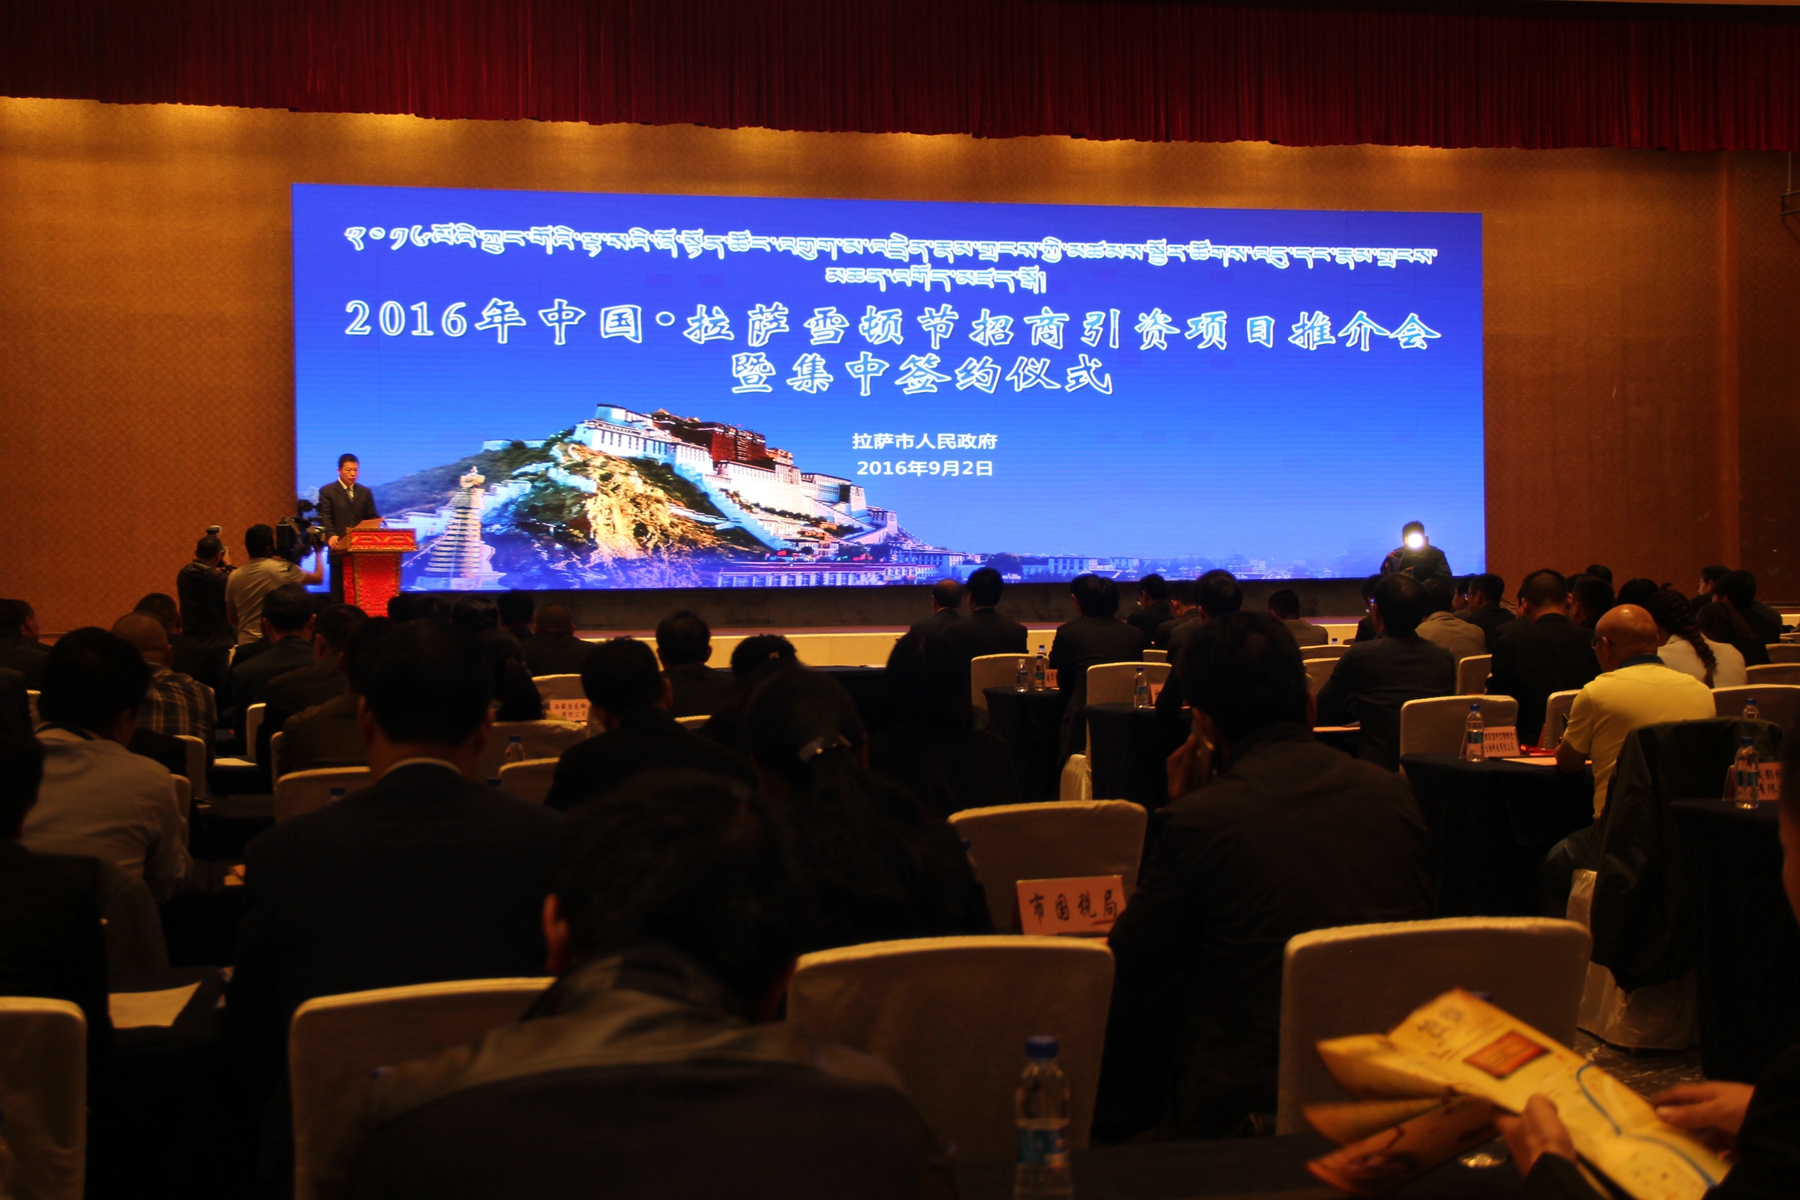 Lhasa Shoton Festival saw 50 economic and trade projects contracts signed